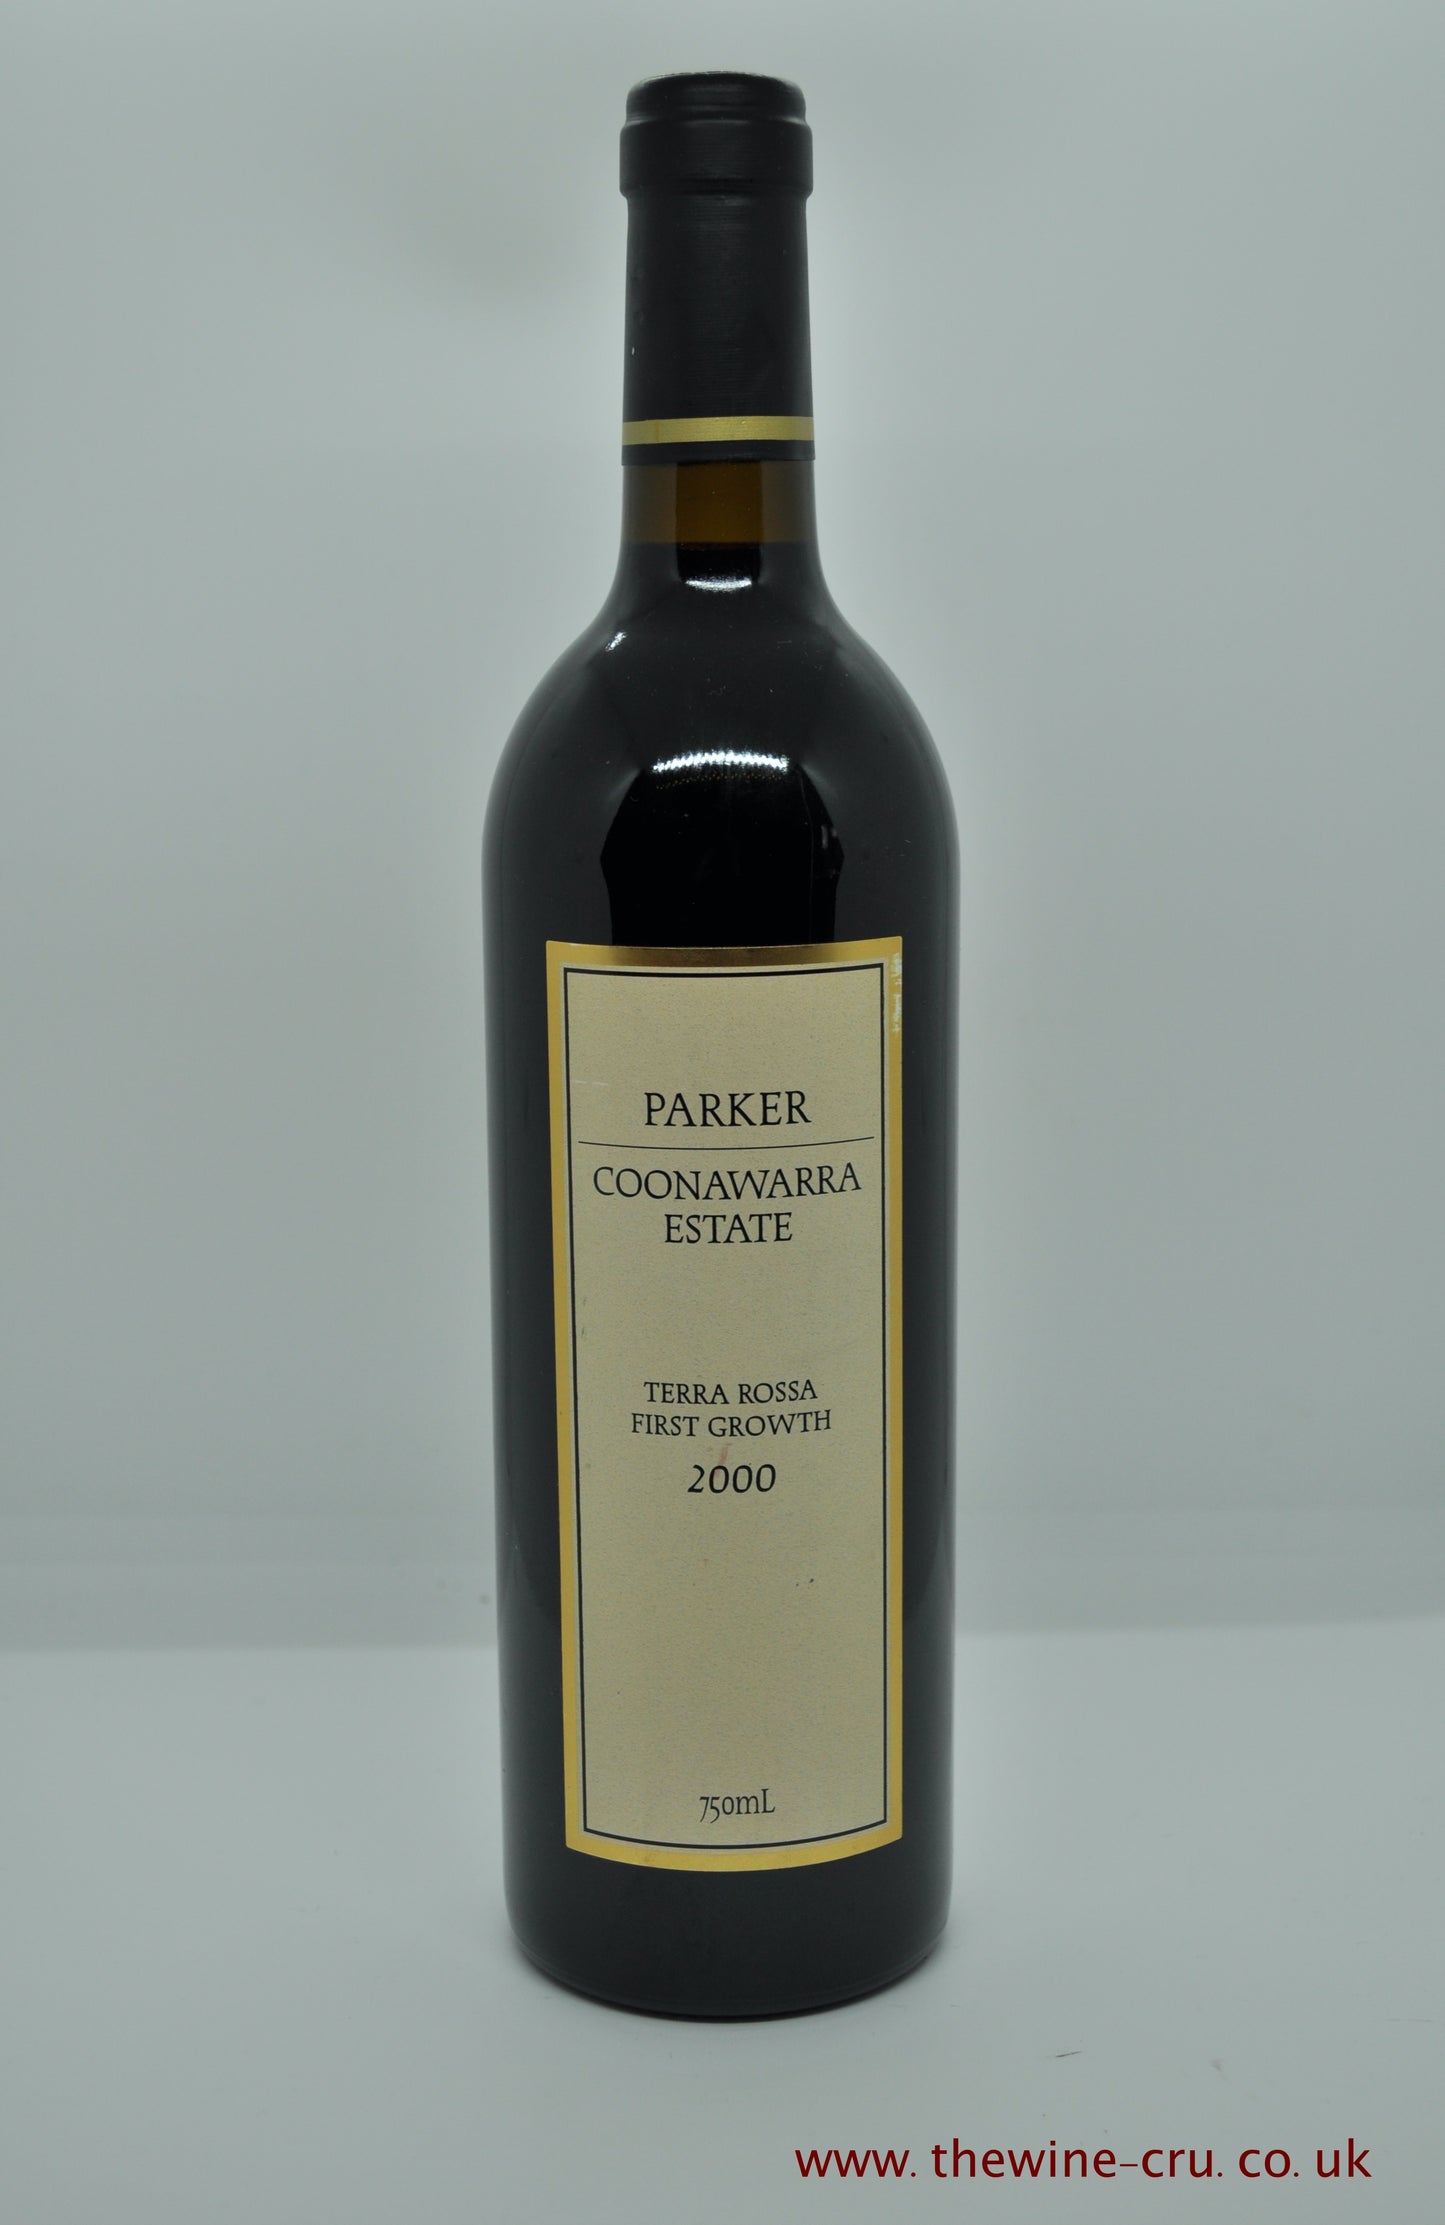 2000 vintage red wine. Parker First Growth 2000. Australia, Coonawarra. Immediate delivery. Free local delivery. Gift wrapping available.